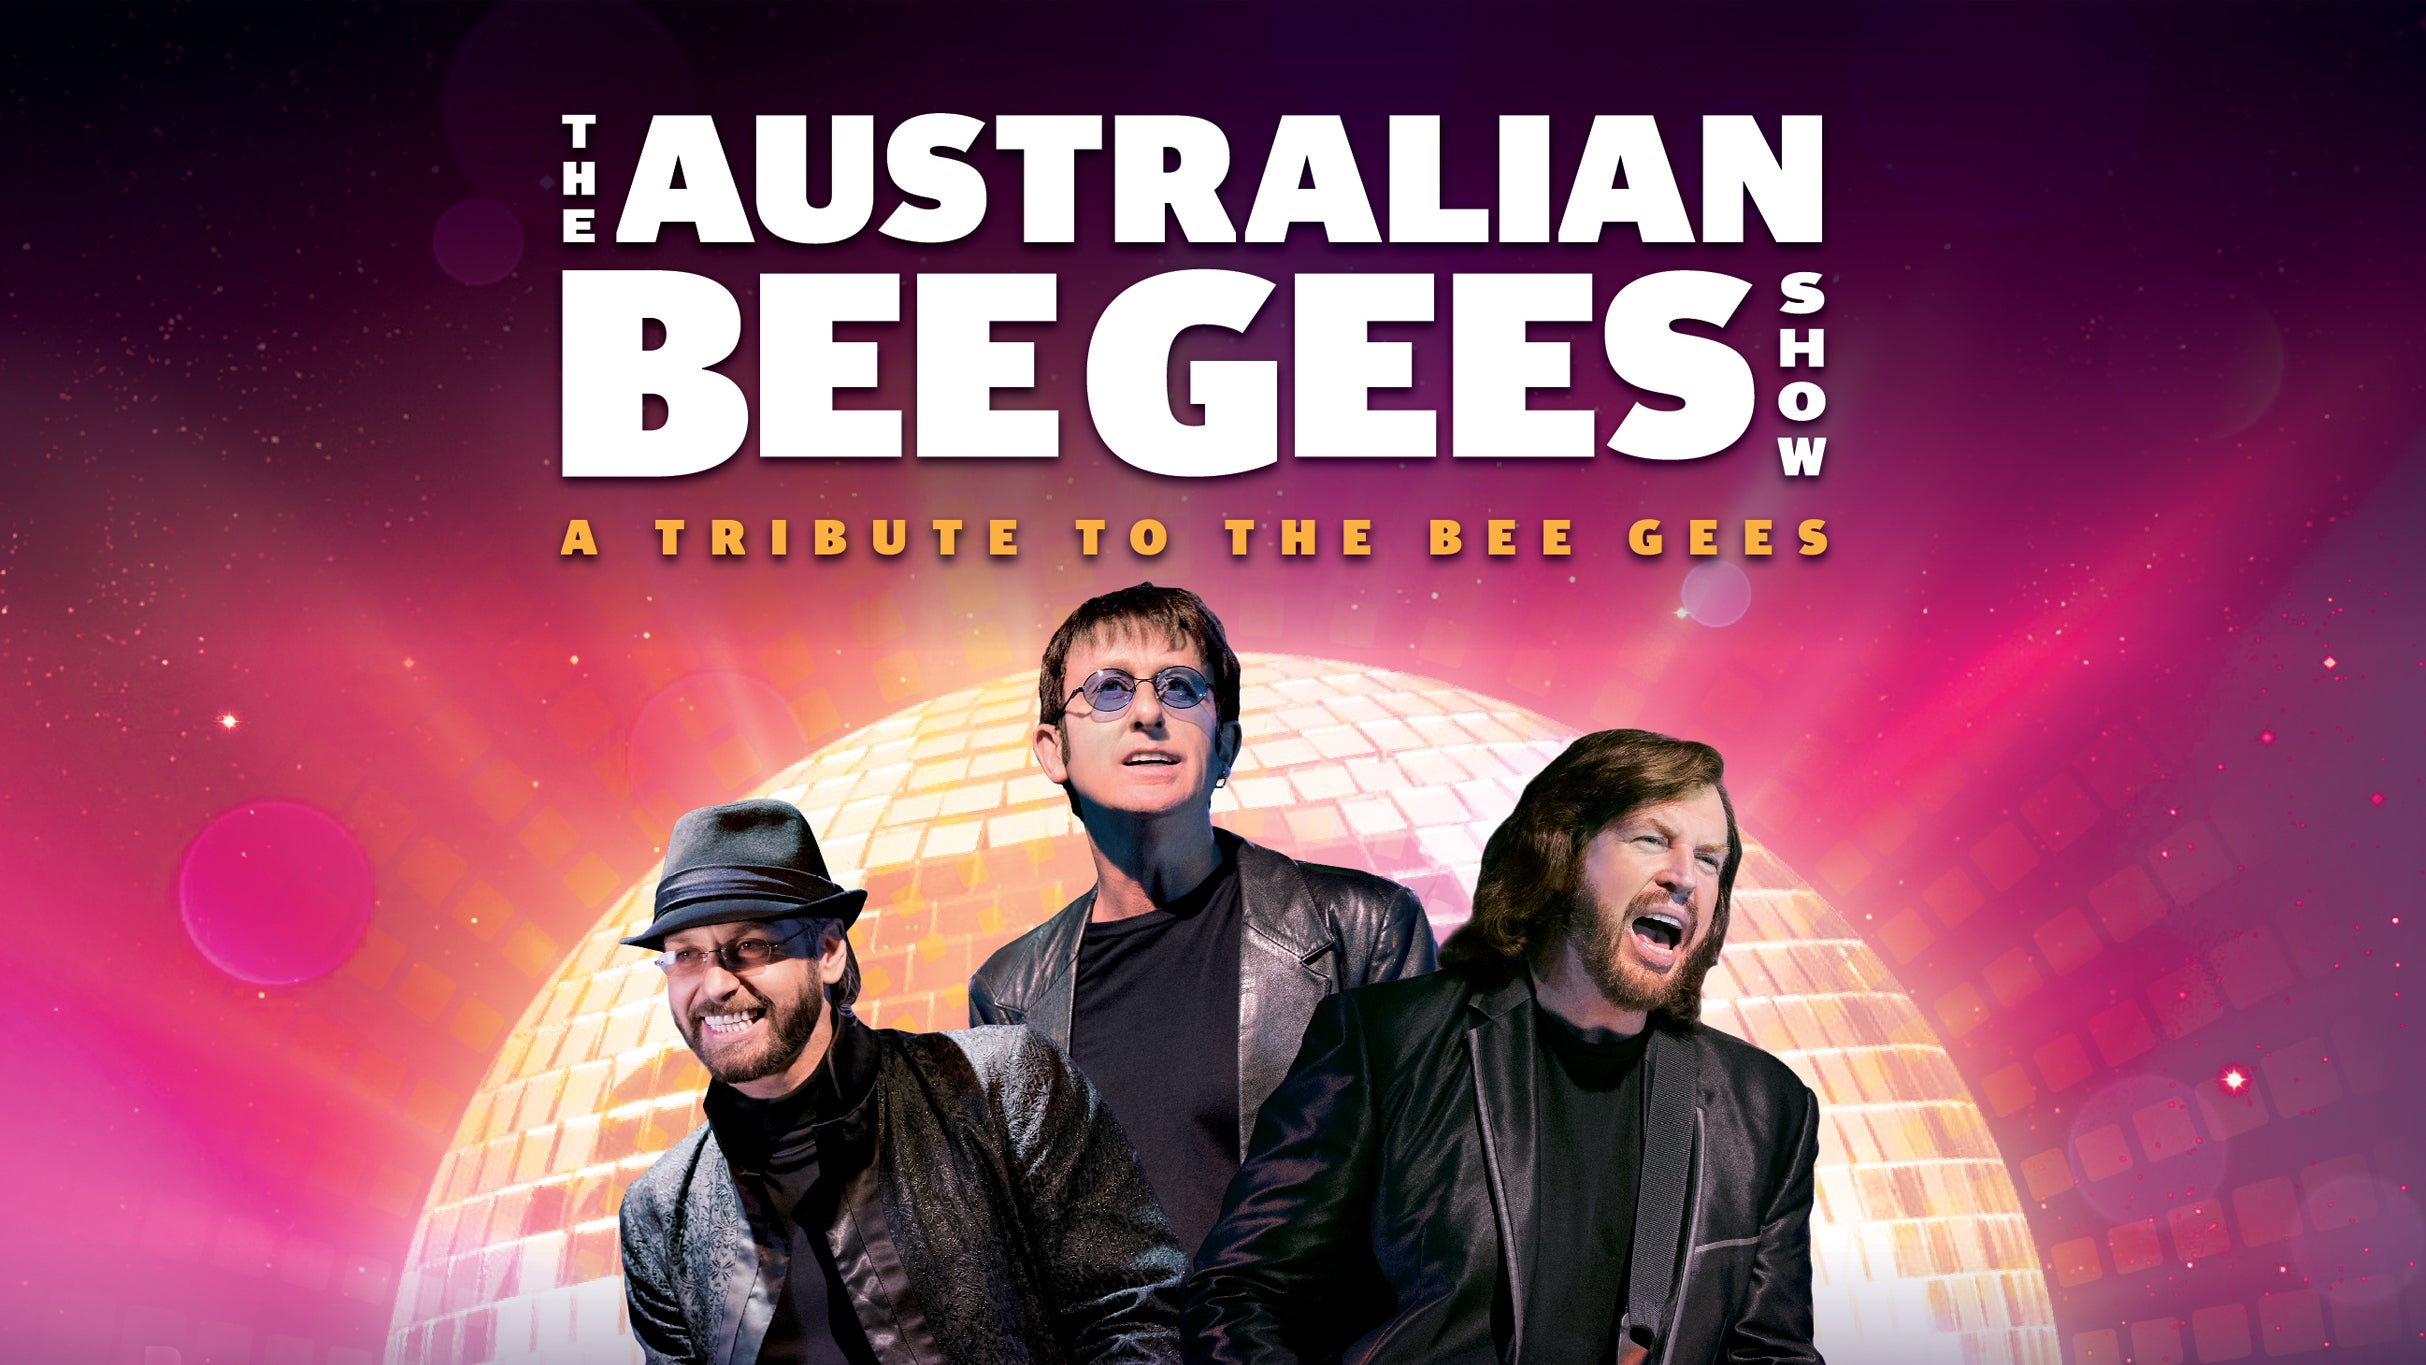 The Australian Bee Gees Show - A Tribute To The Bee Gees presale information on freepresalepasswords.com